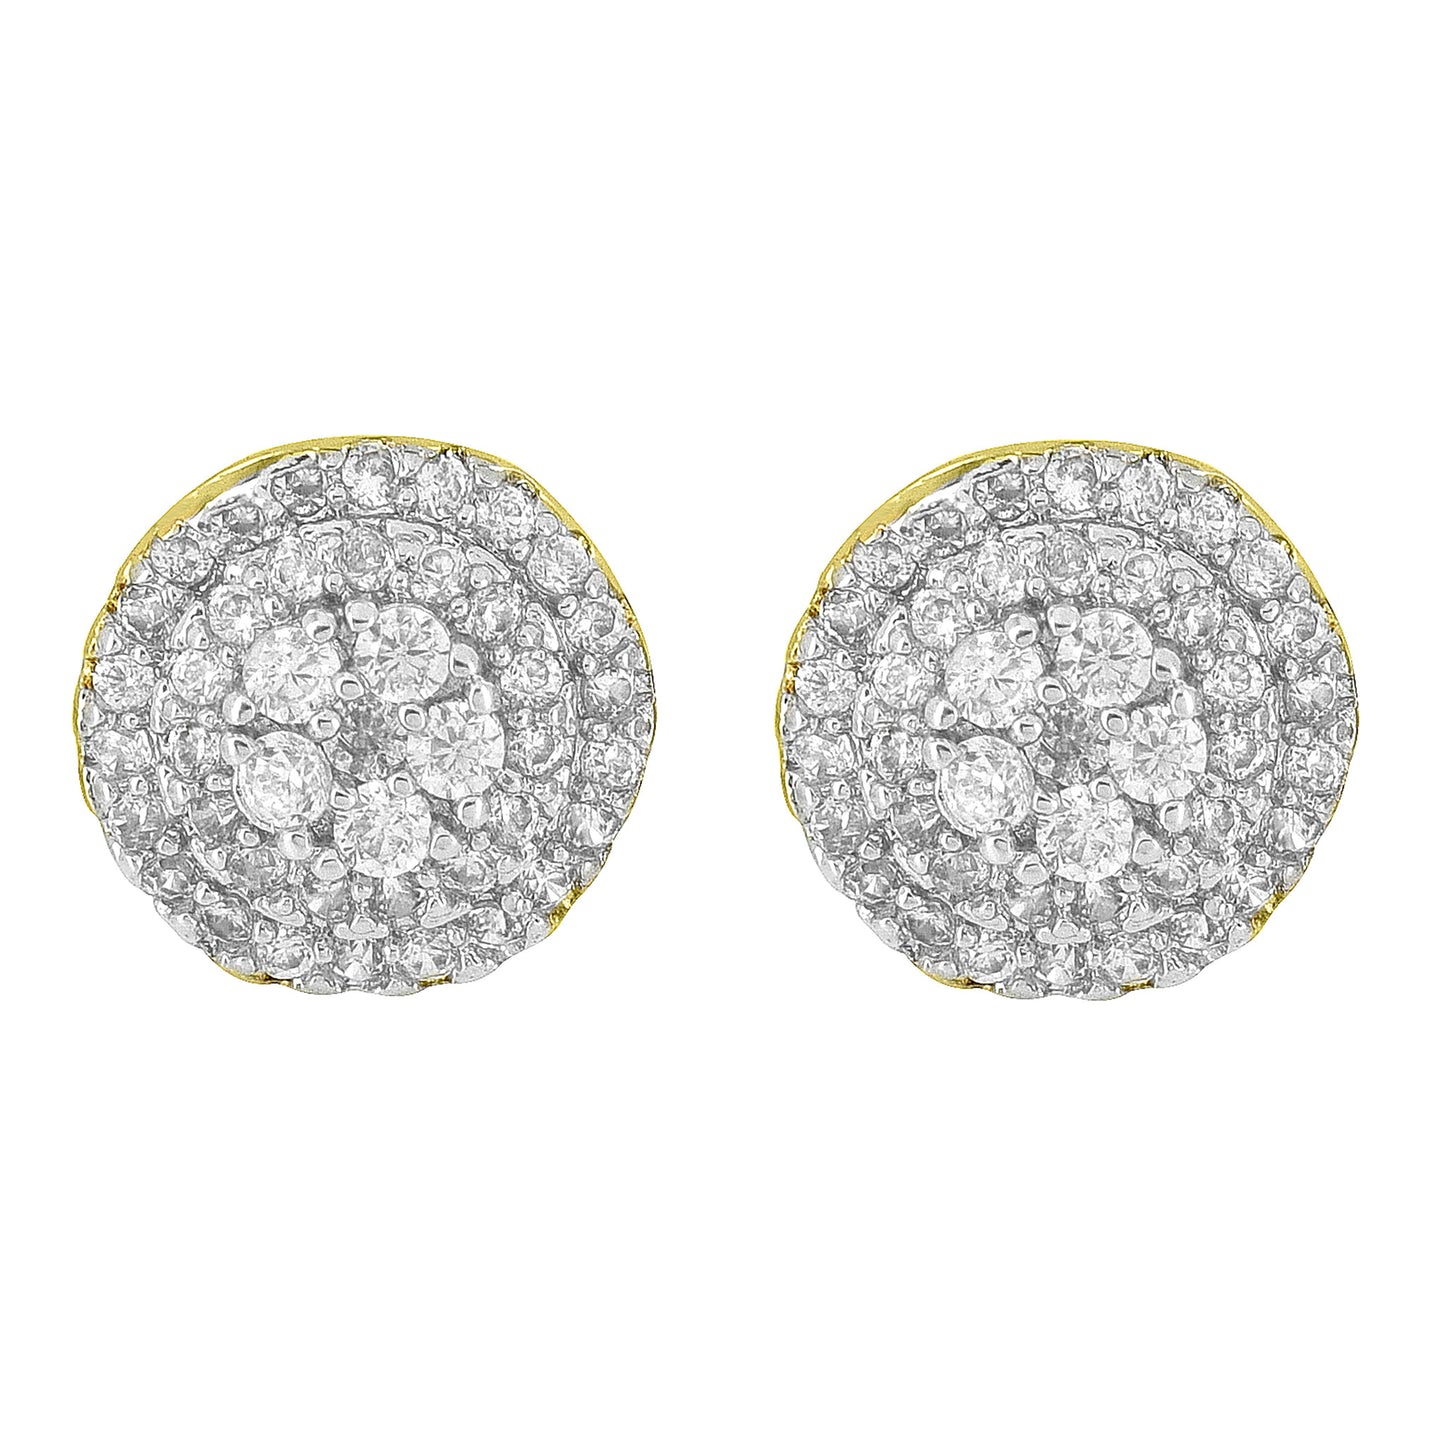 Cluster Set Round Earrings 14K Yellow Gold Finish Screw Back